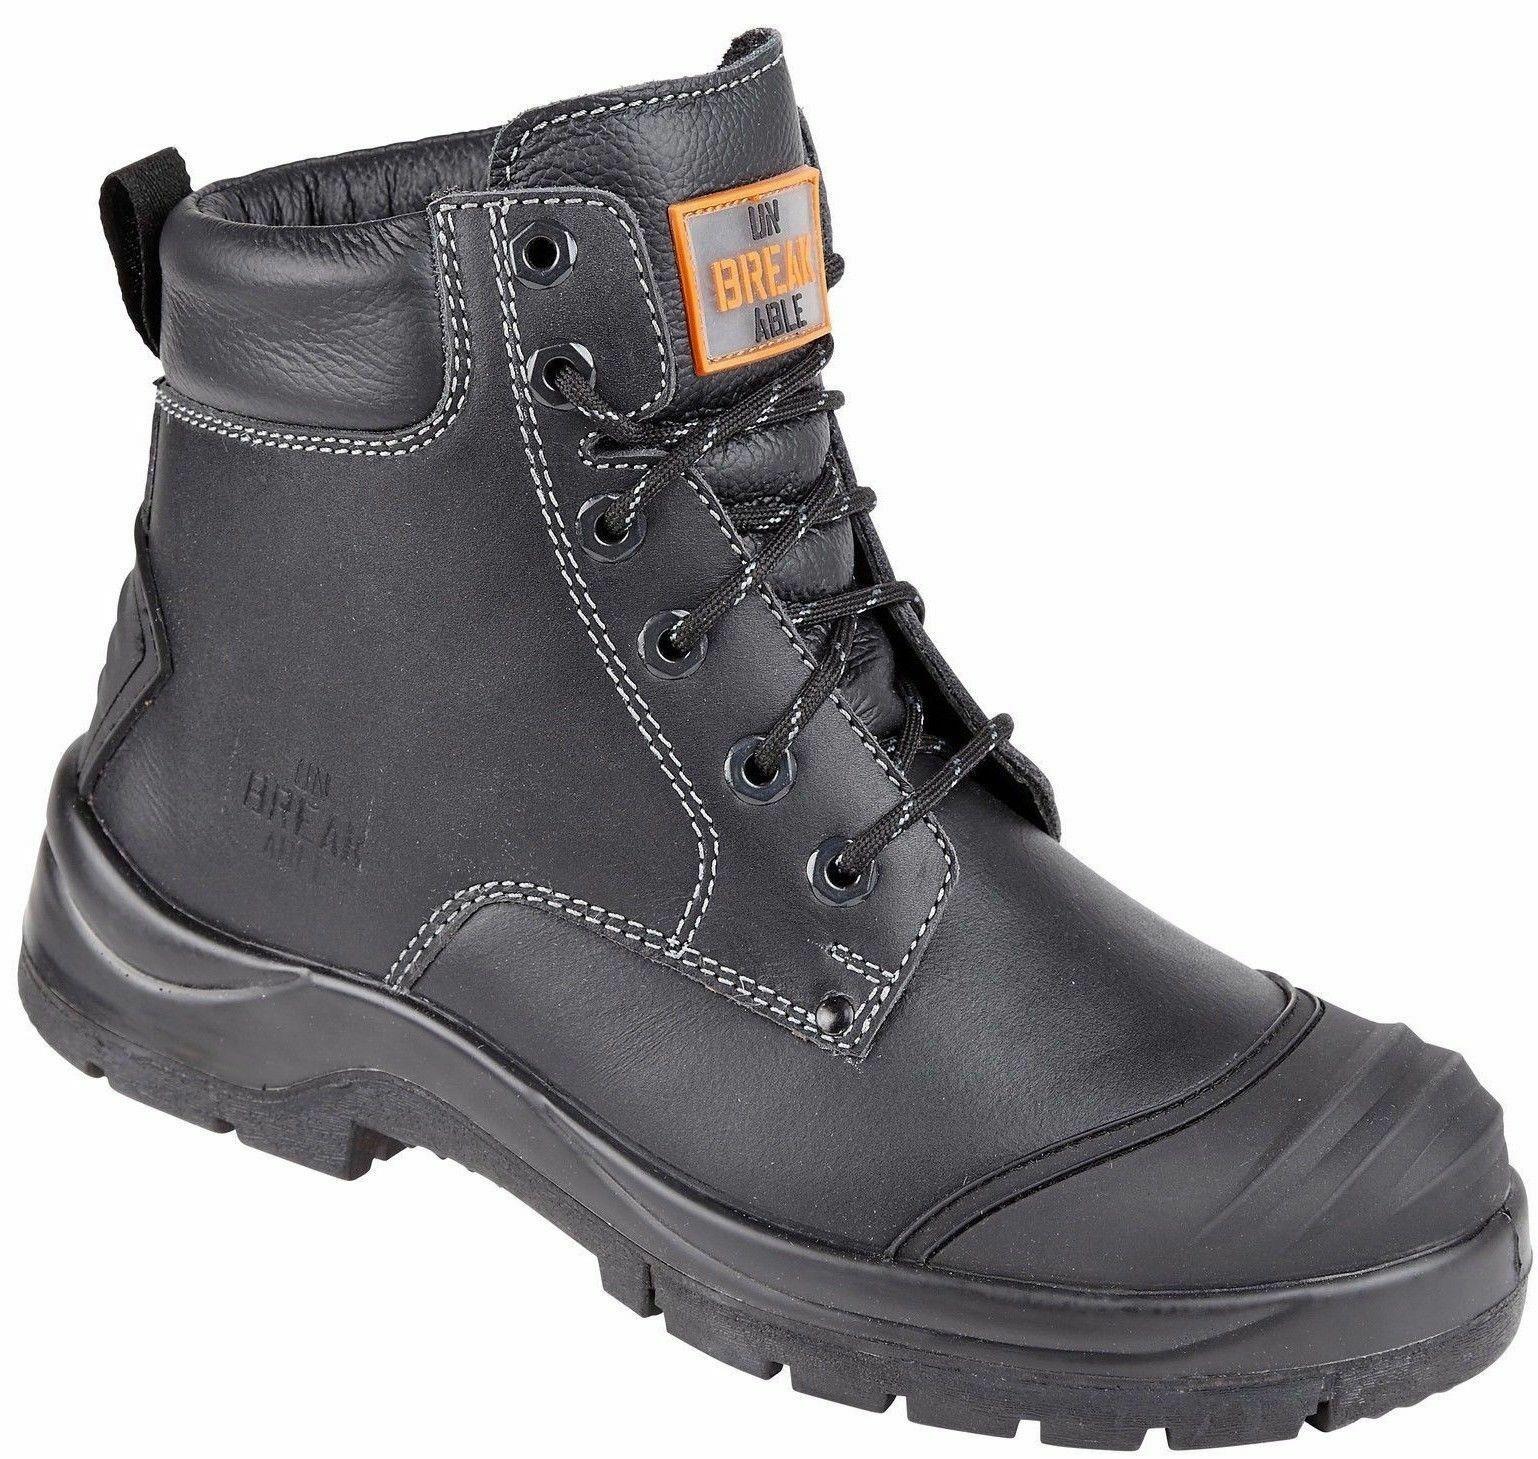 Unbreakable Trench-Pro S3 black leather steel toe/midsole scuff-cap safety boot #8103